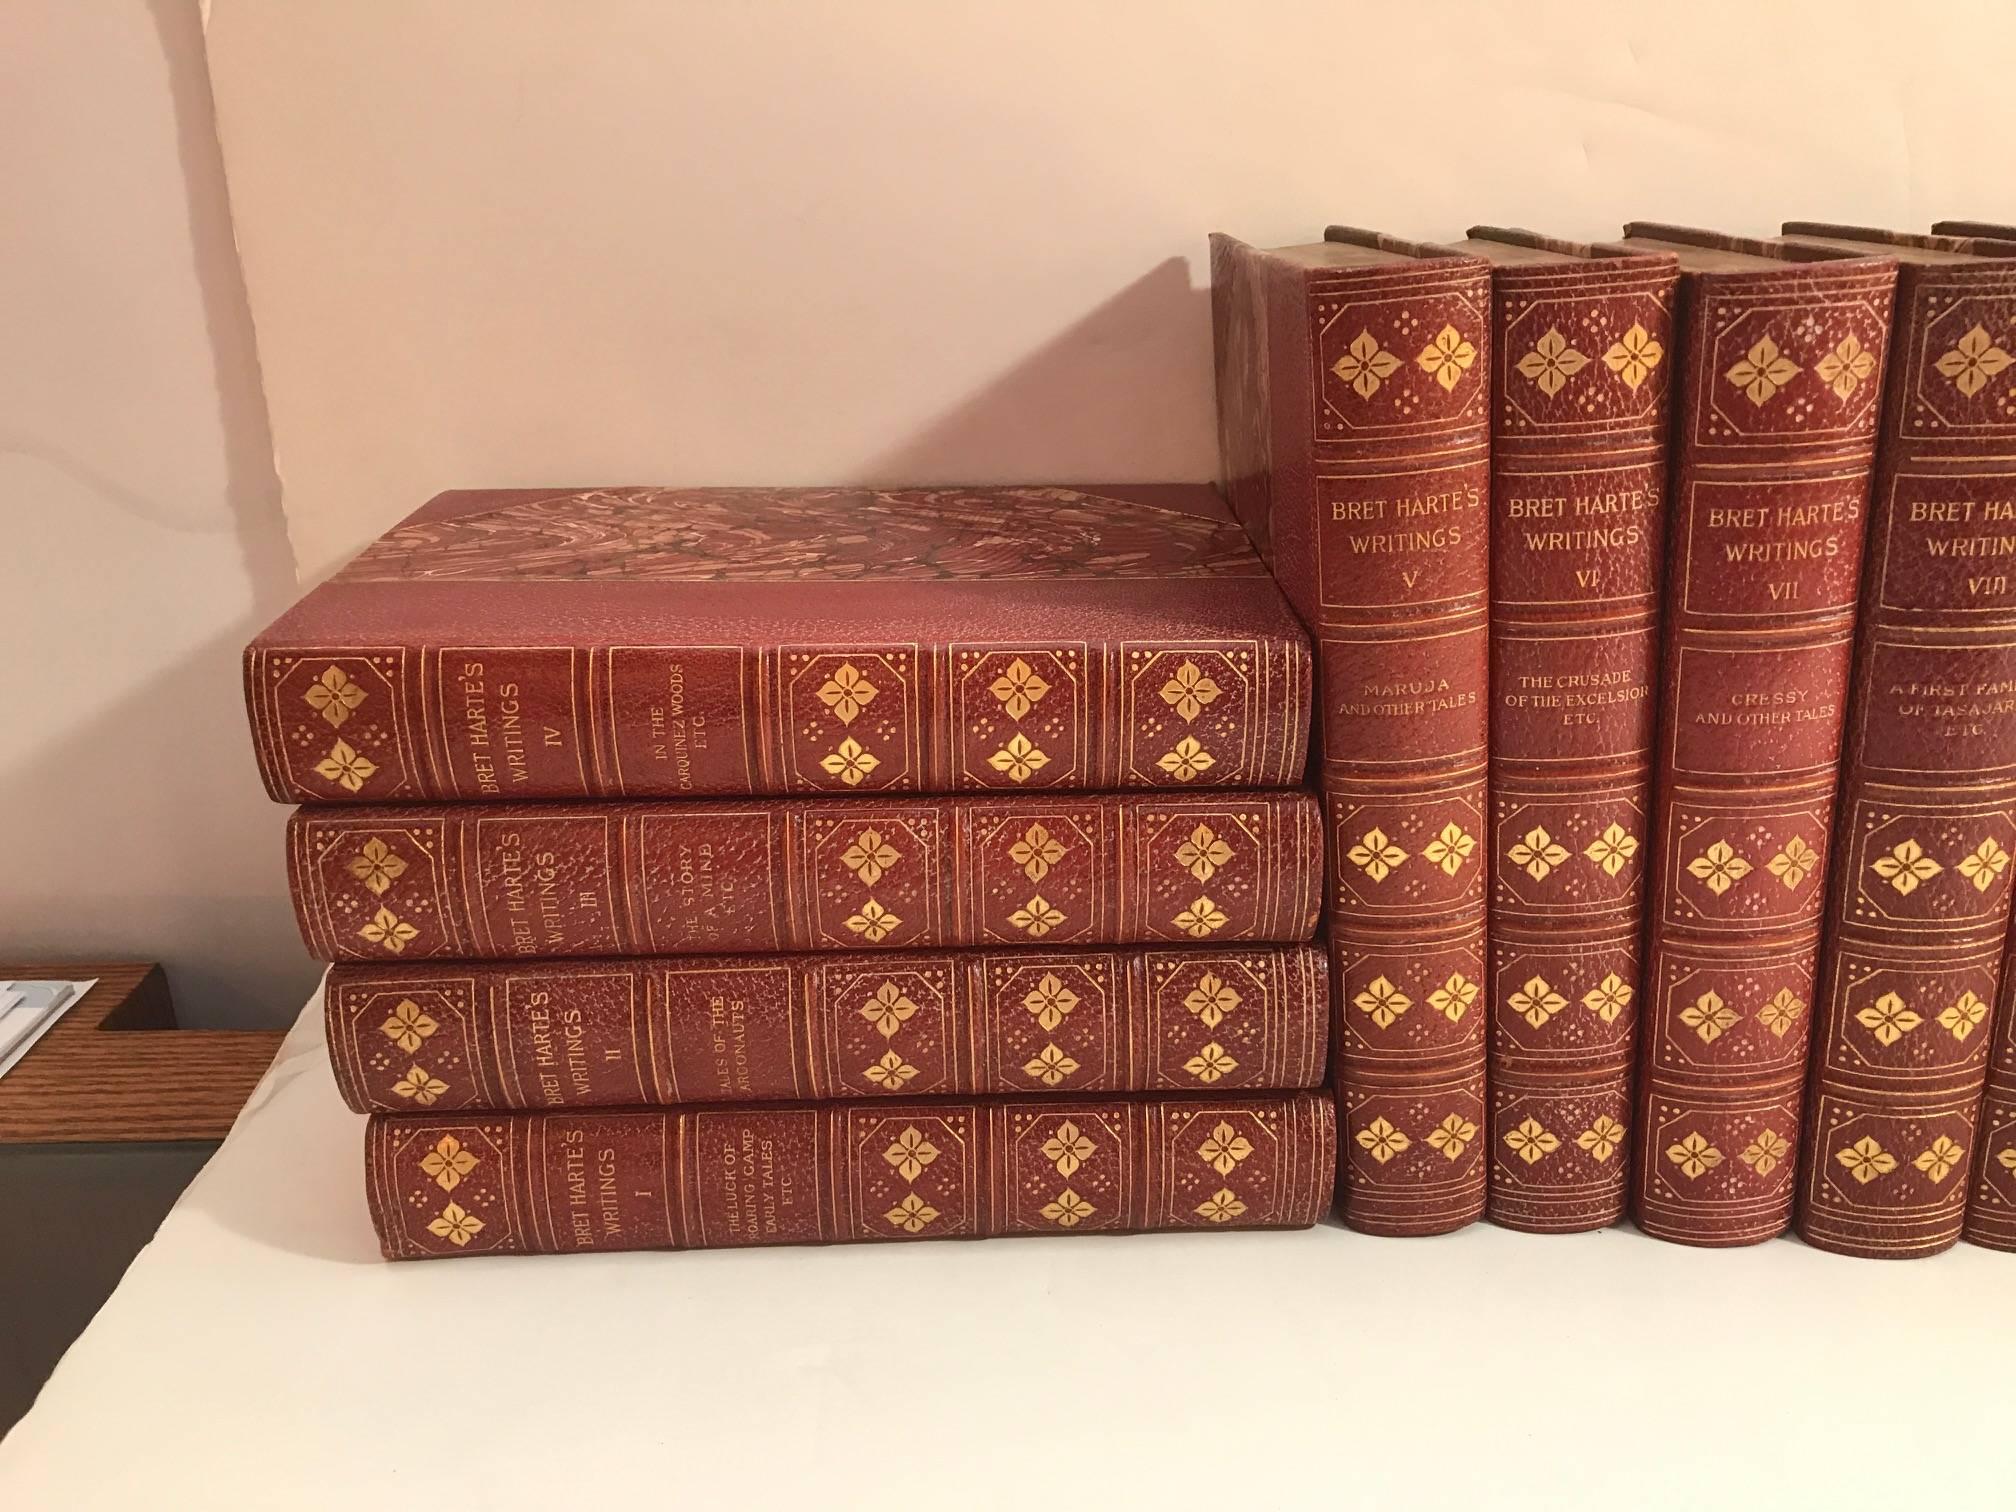 The full set of Bret Harte's writings, 19 volumes complete, superb firm clean volumes. Red leather and marbleized paper, top page ends gold gilt. Typeface is clear and readable. Paper is free of any age-spotting or other defects.

Francis Bret